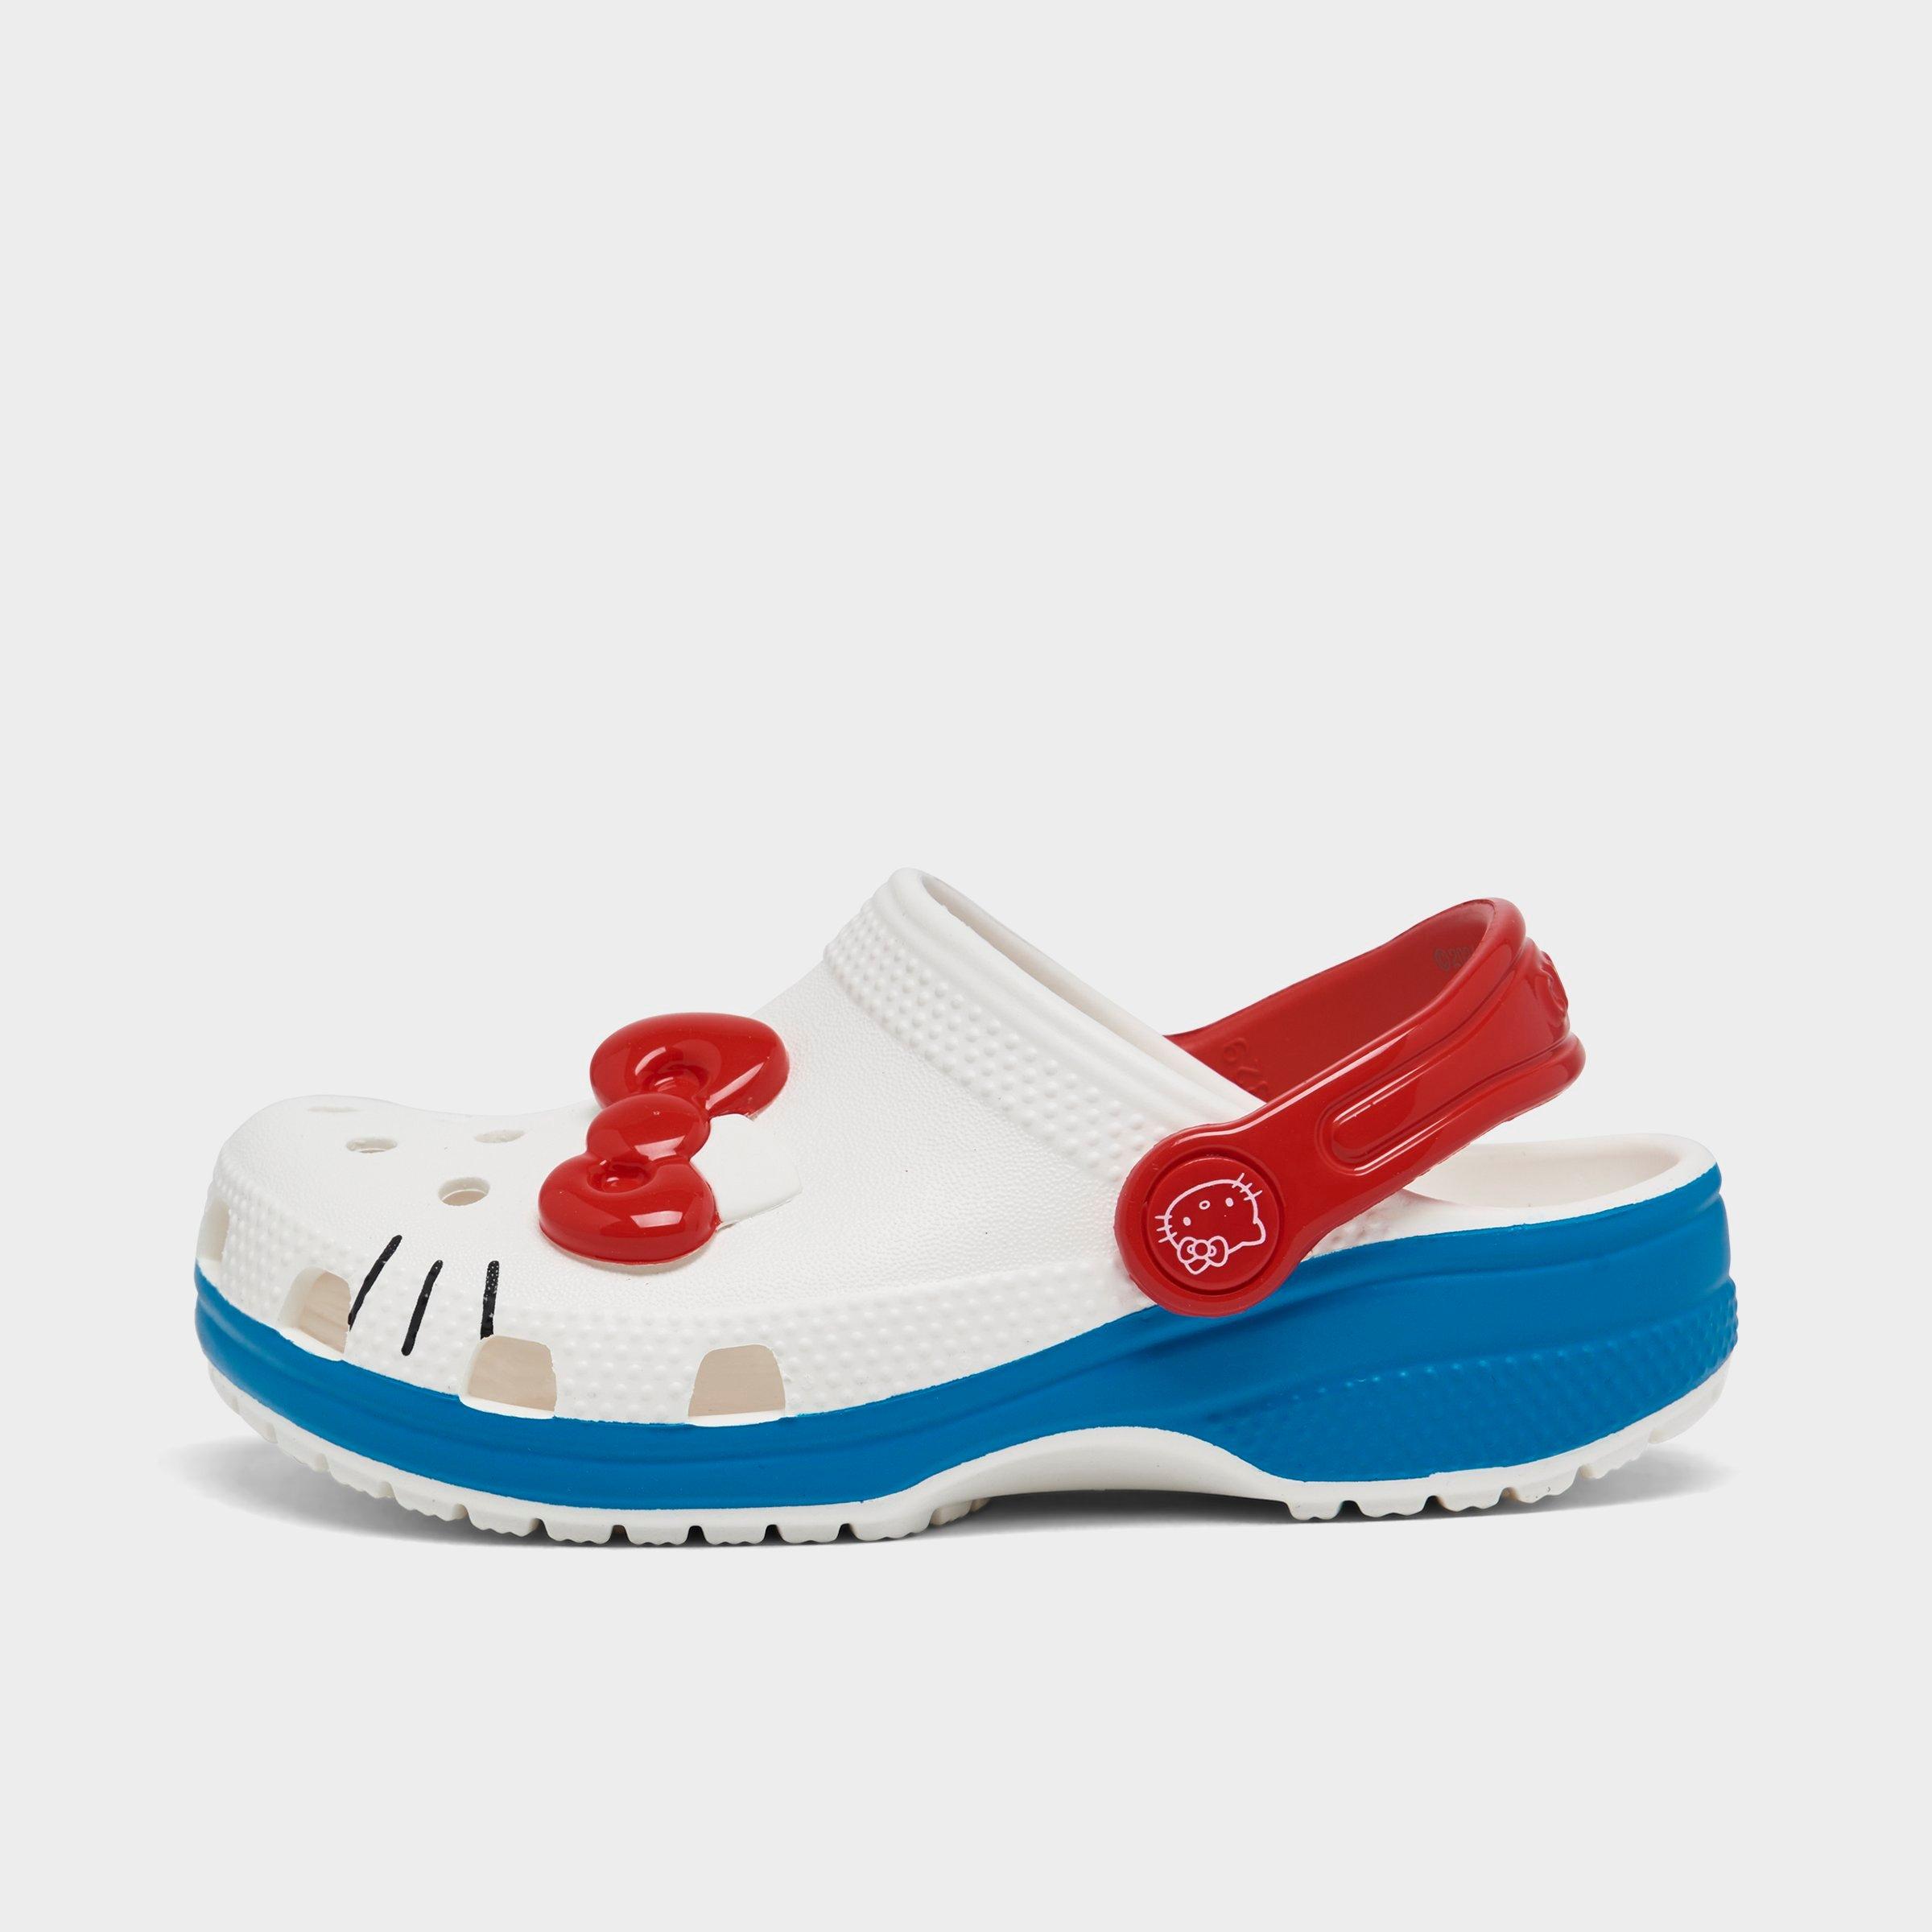 UPC 196265573820 product image for Crocs Girls' Toddler x Hello Kitty Classic Clog Shoes in White/White Size 9.0 | upcitemdb.com